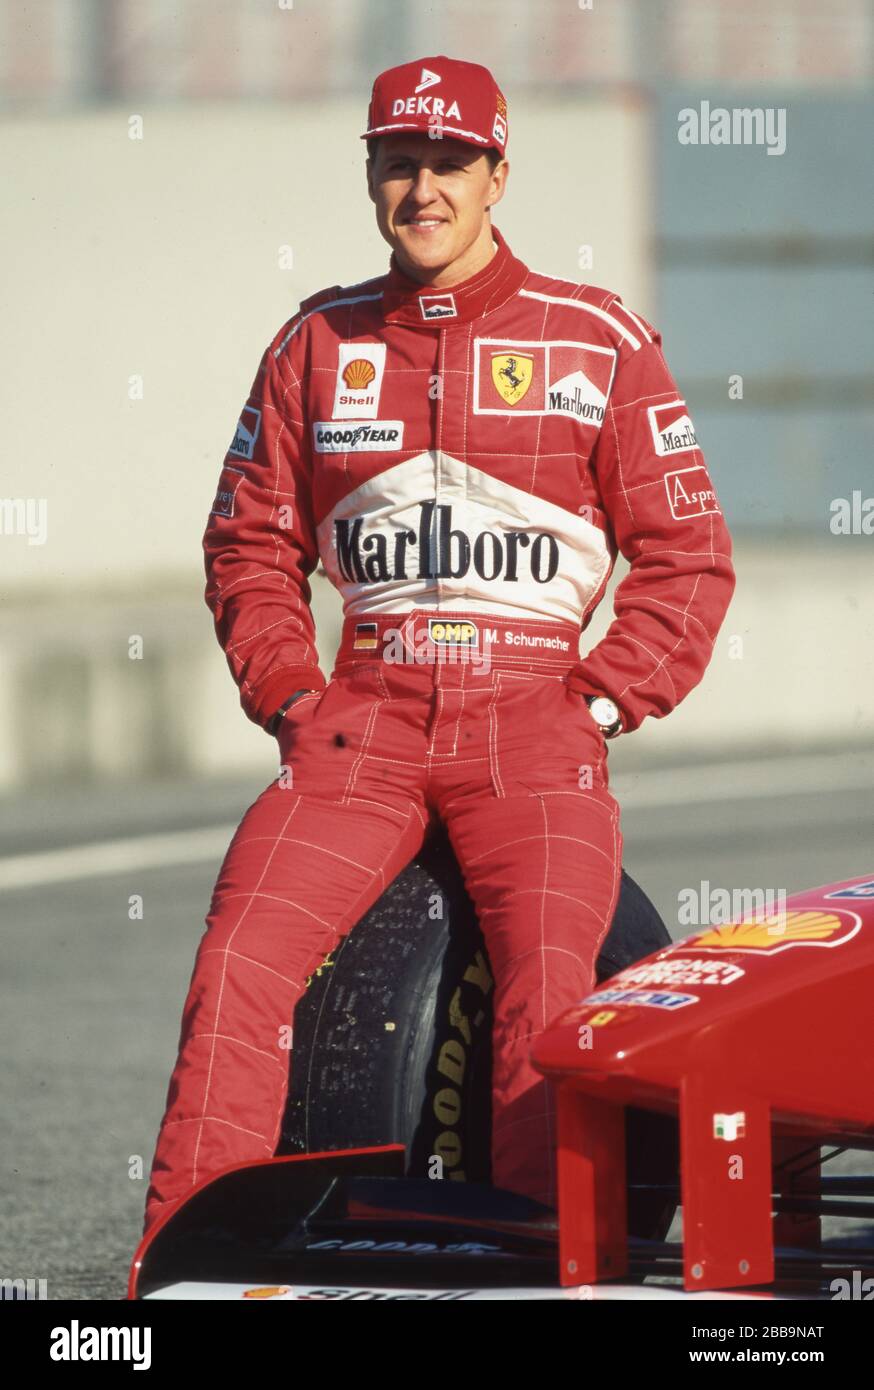 firo: Formula 1, season 1997 Sport, Motorsport, Formula 1, archive, archive pictures Team Ferrari (1996-2006) Michael Schumacher, Germany, was a Formula 1 driver from 1991 to 2006 and 2010 to 2012, Schumacher was 7, seven times, Formula 1, world champion, German national hero, brought Formula 1 after Germany, one of the largest Germans, 1st season at Ferrari Michael Schumacher, presentation, half figure | usage worldwide Stock Photo